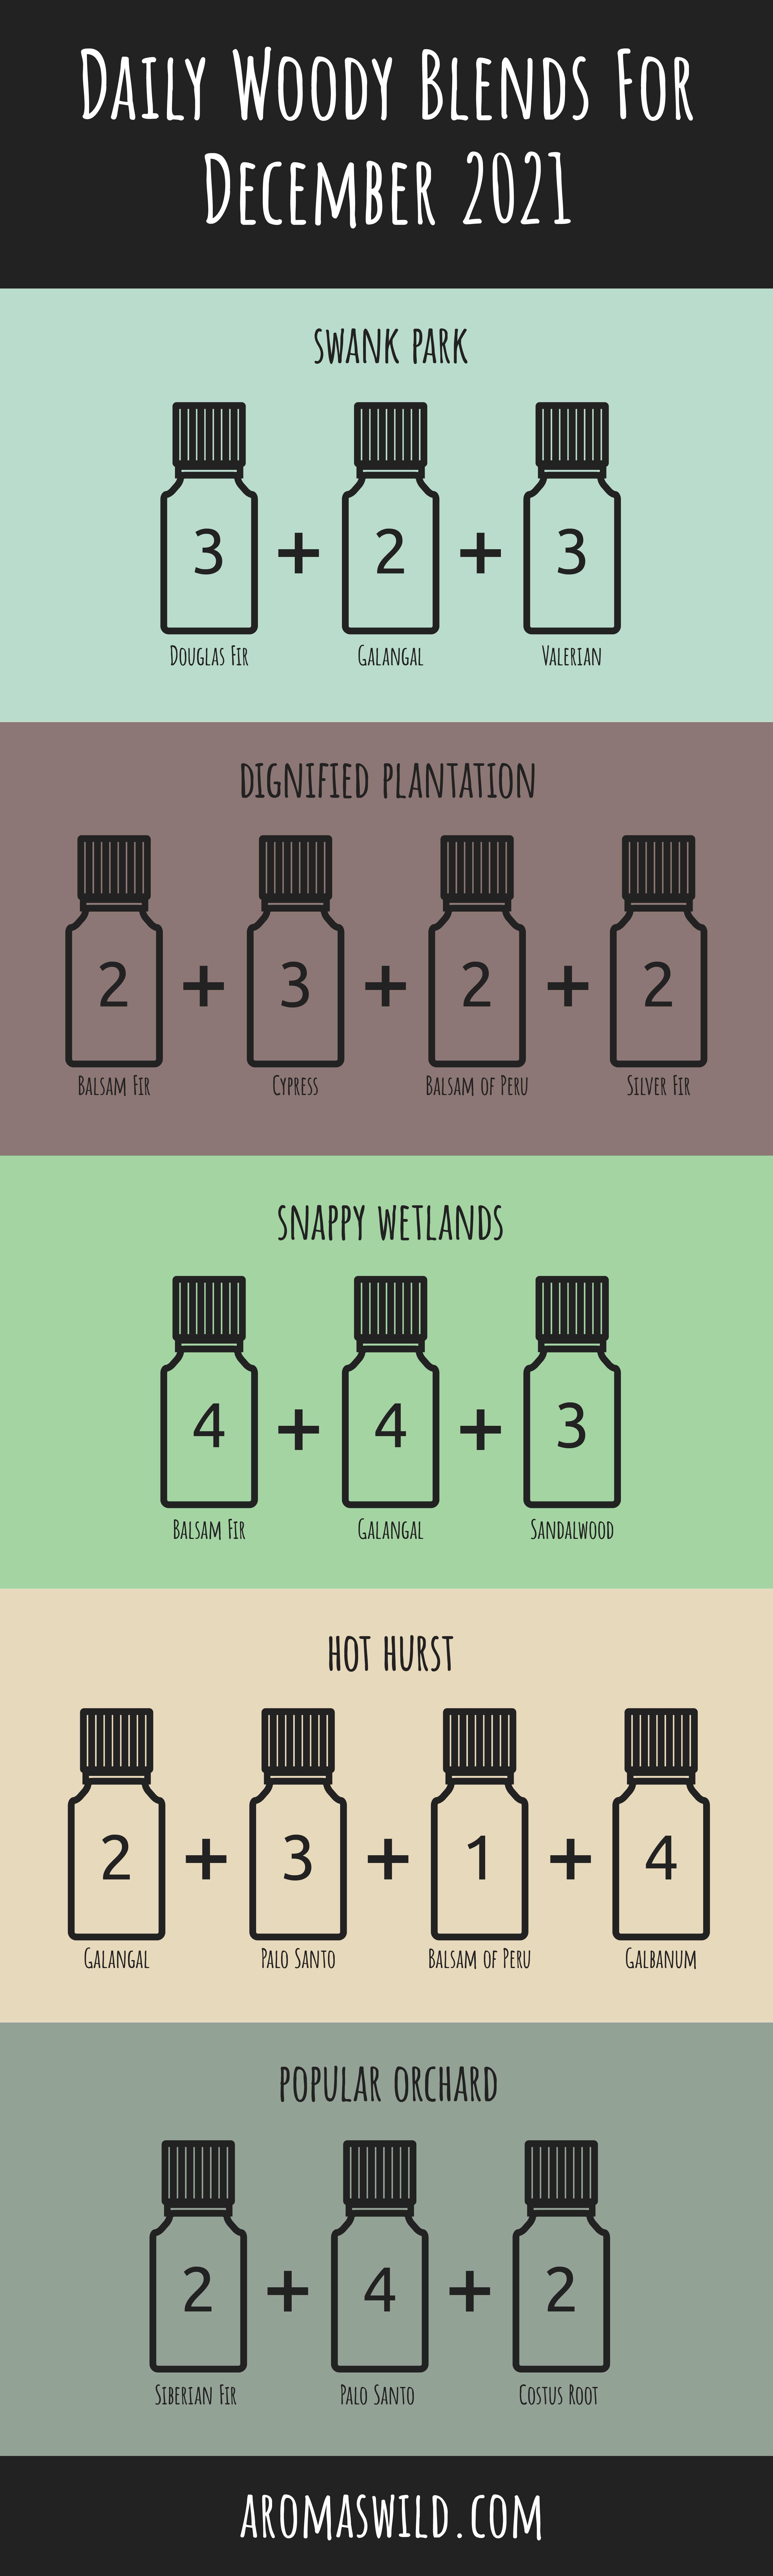 Earthy Scents To Use In Aromatherapy – Daily Woody Blends For 1 December 2021